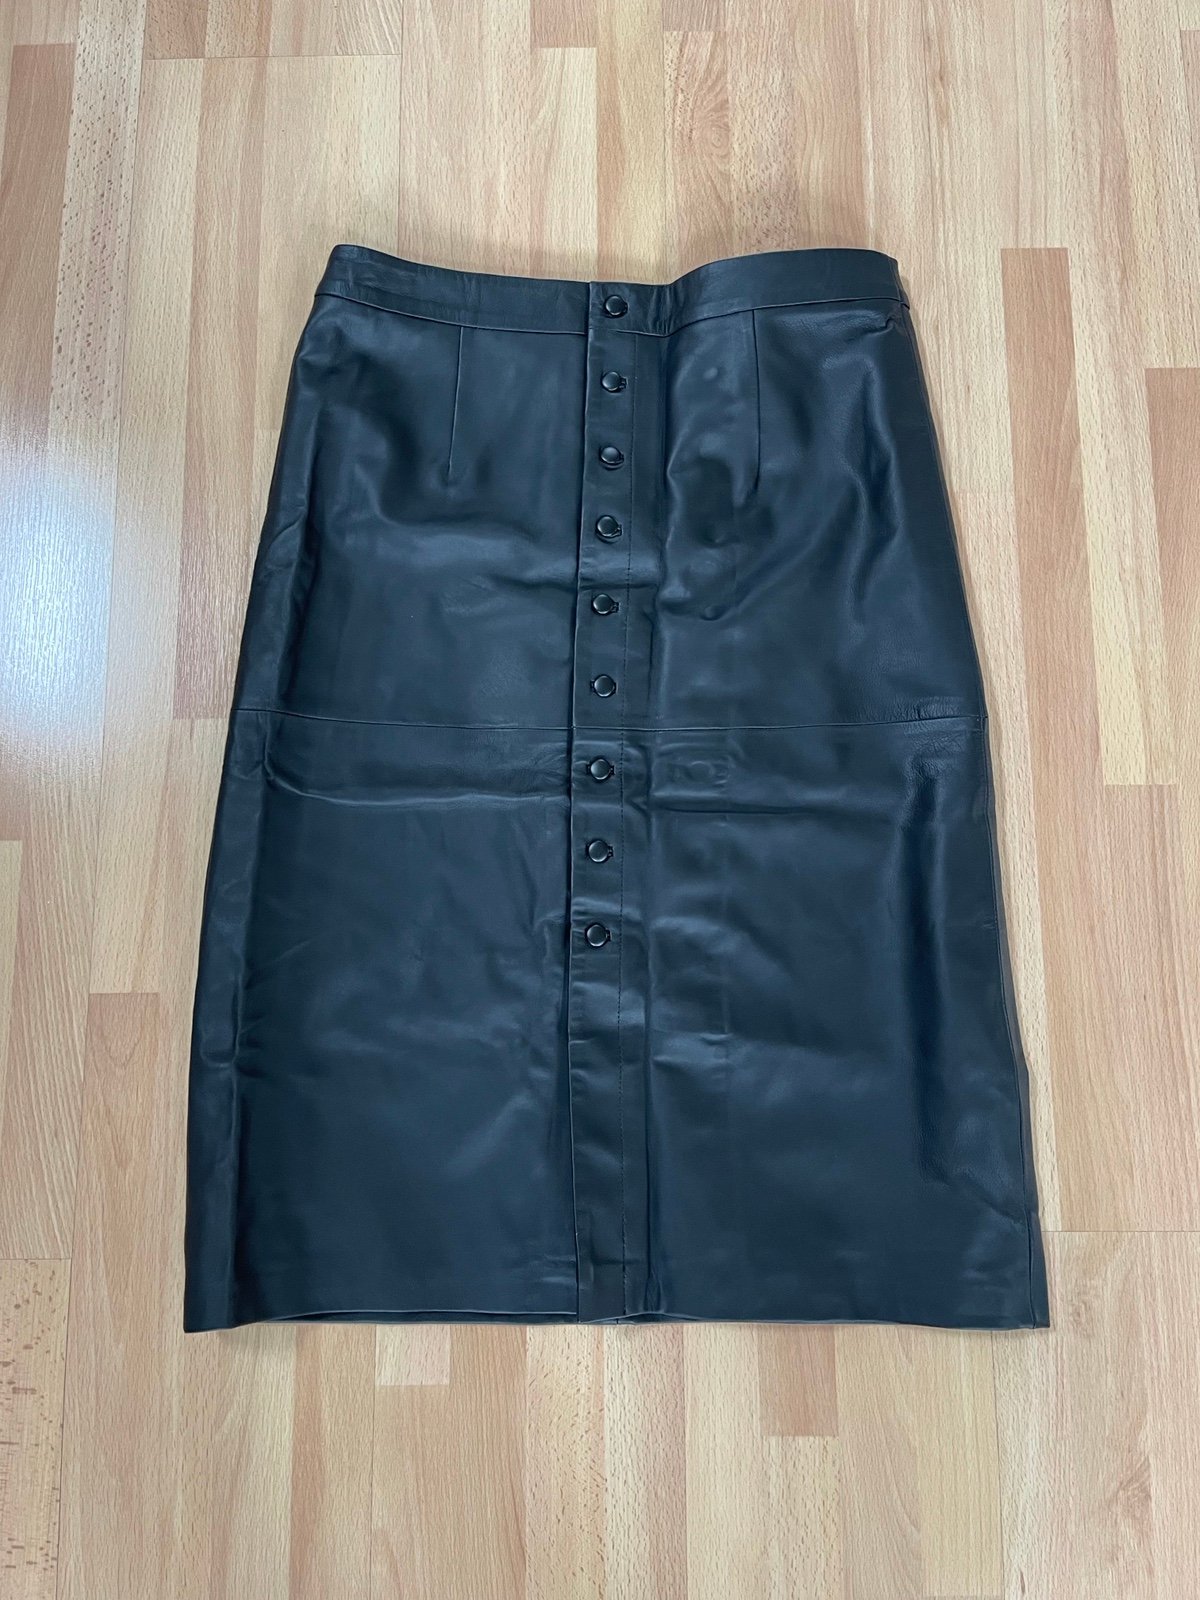 LL Leather Lovers Black Button Front MIDI Skirt 3ySIWZR